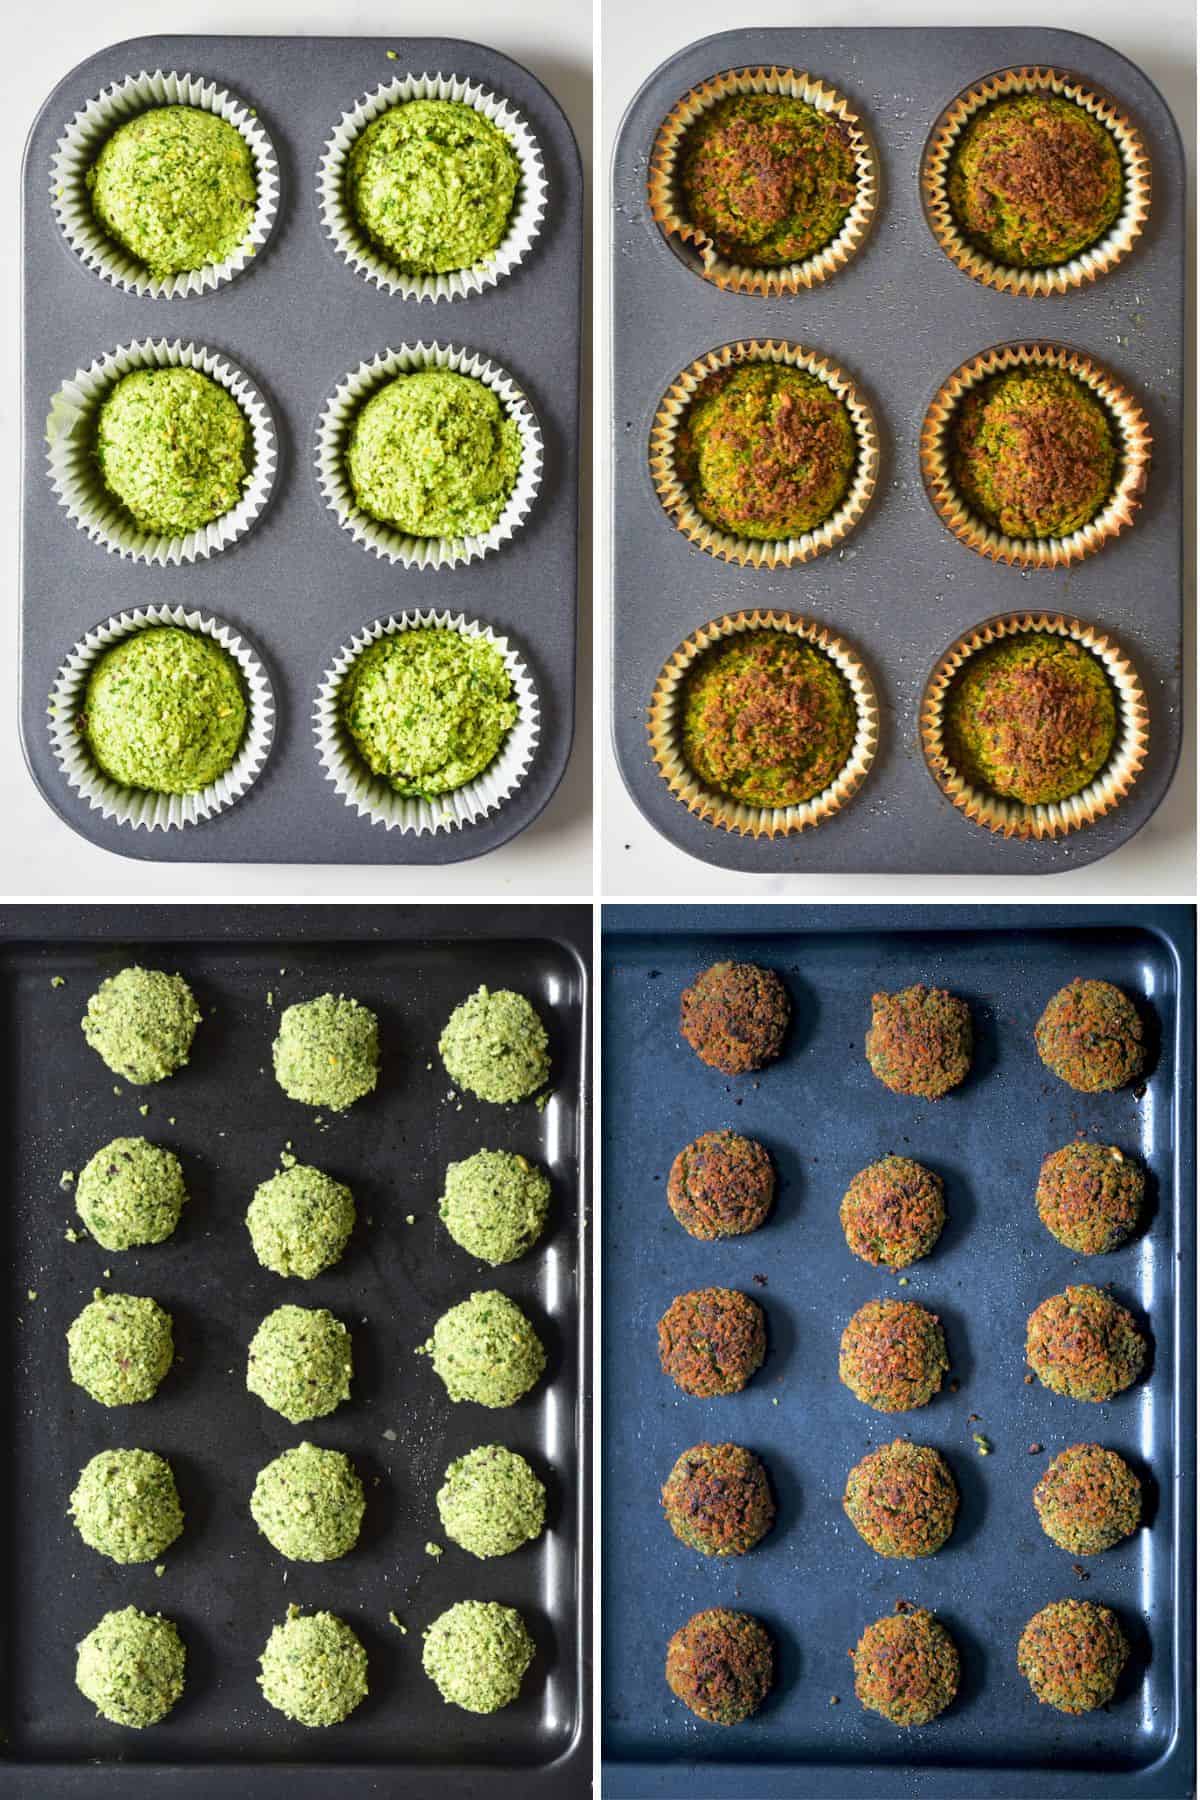 Before and after baking falafel in the oven